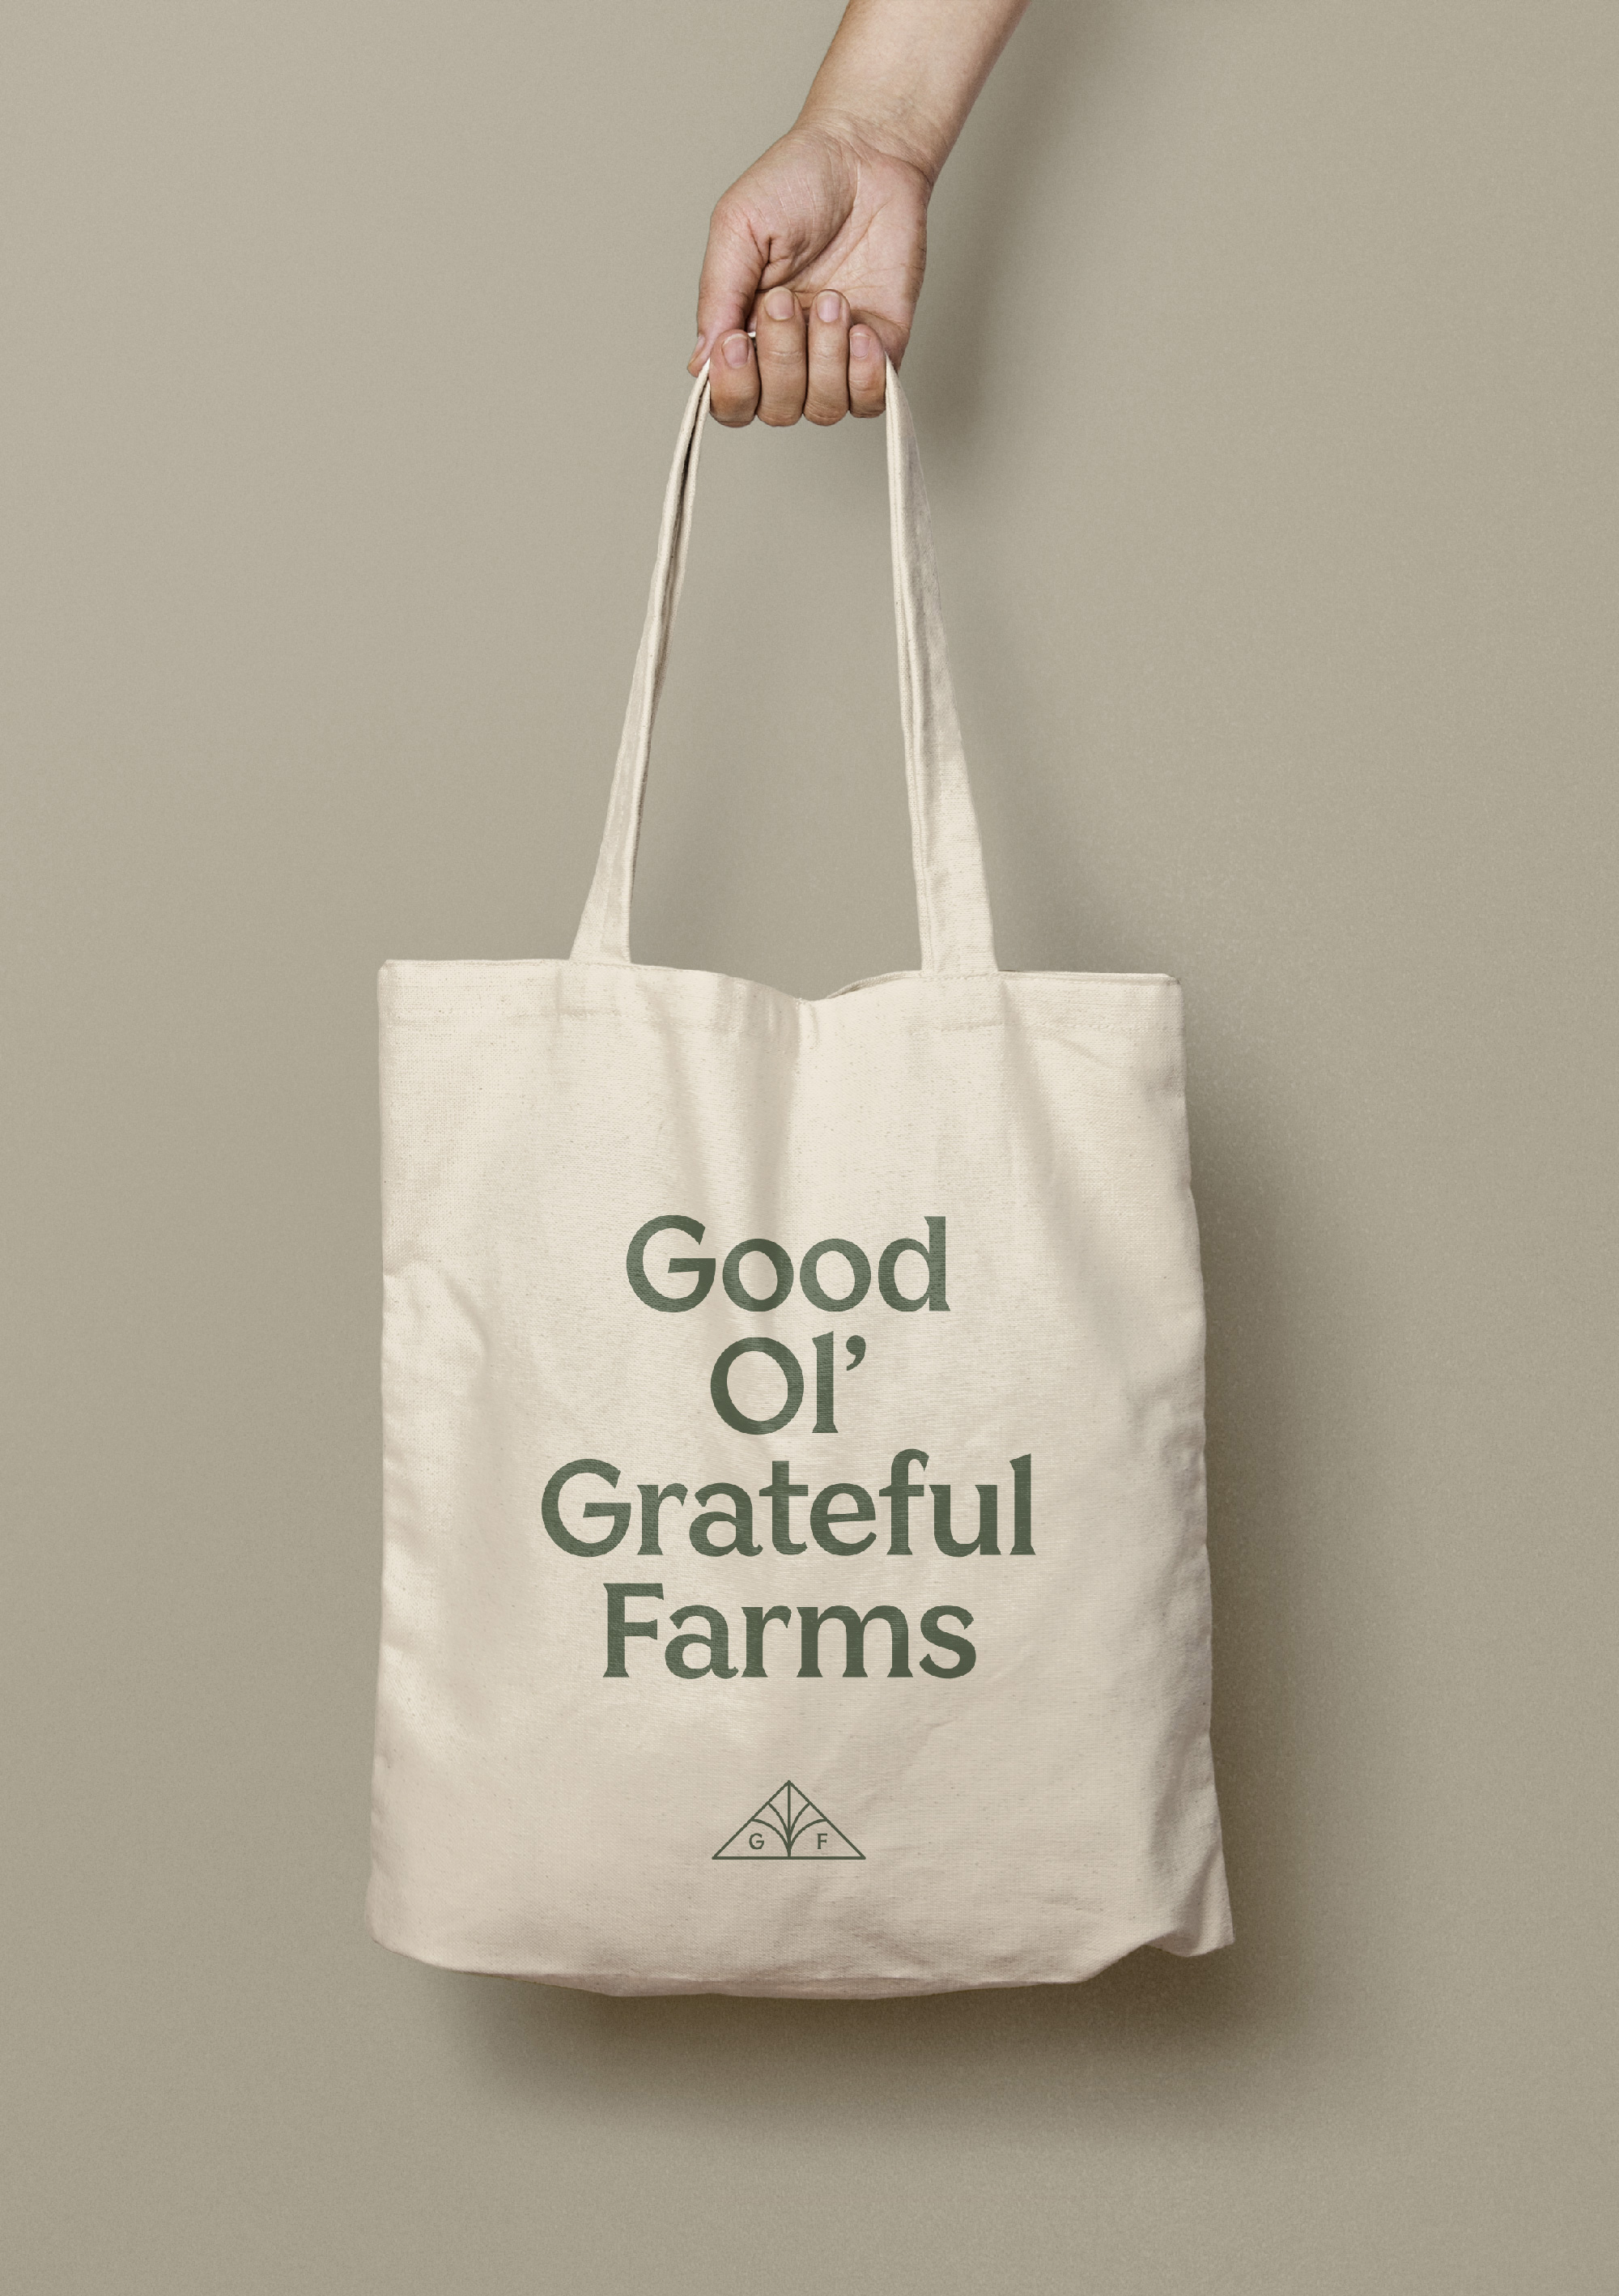 New Logo and Identity for Grateful Farms by Ghost